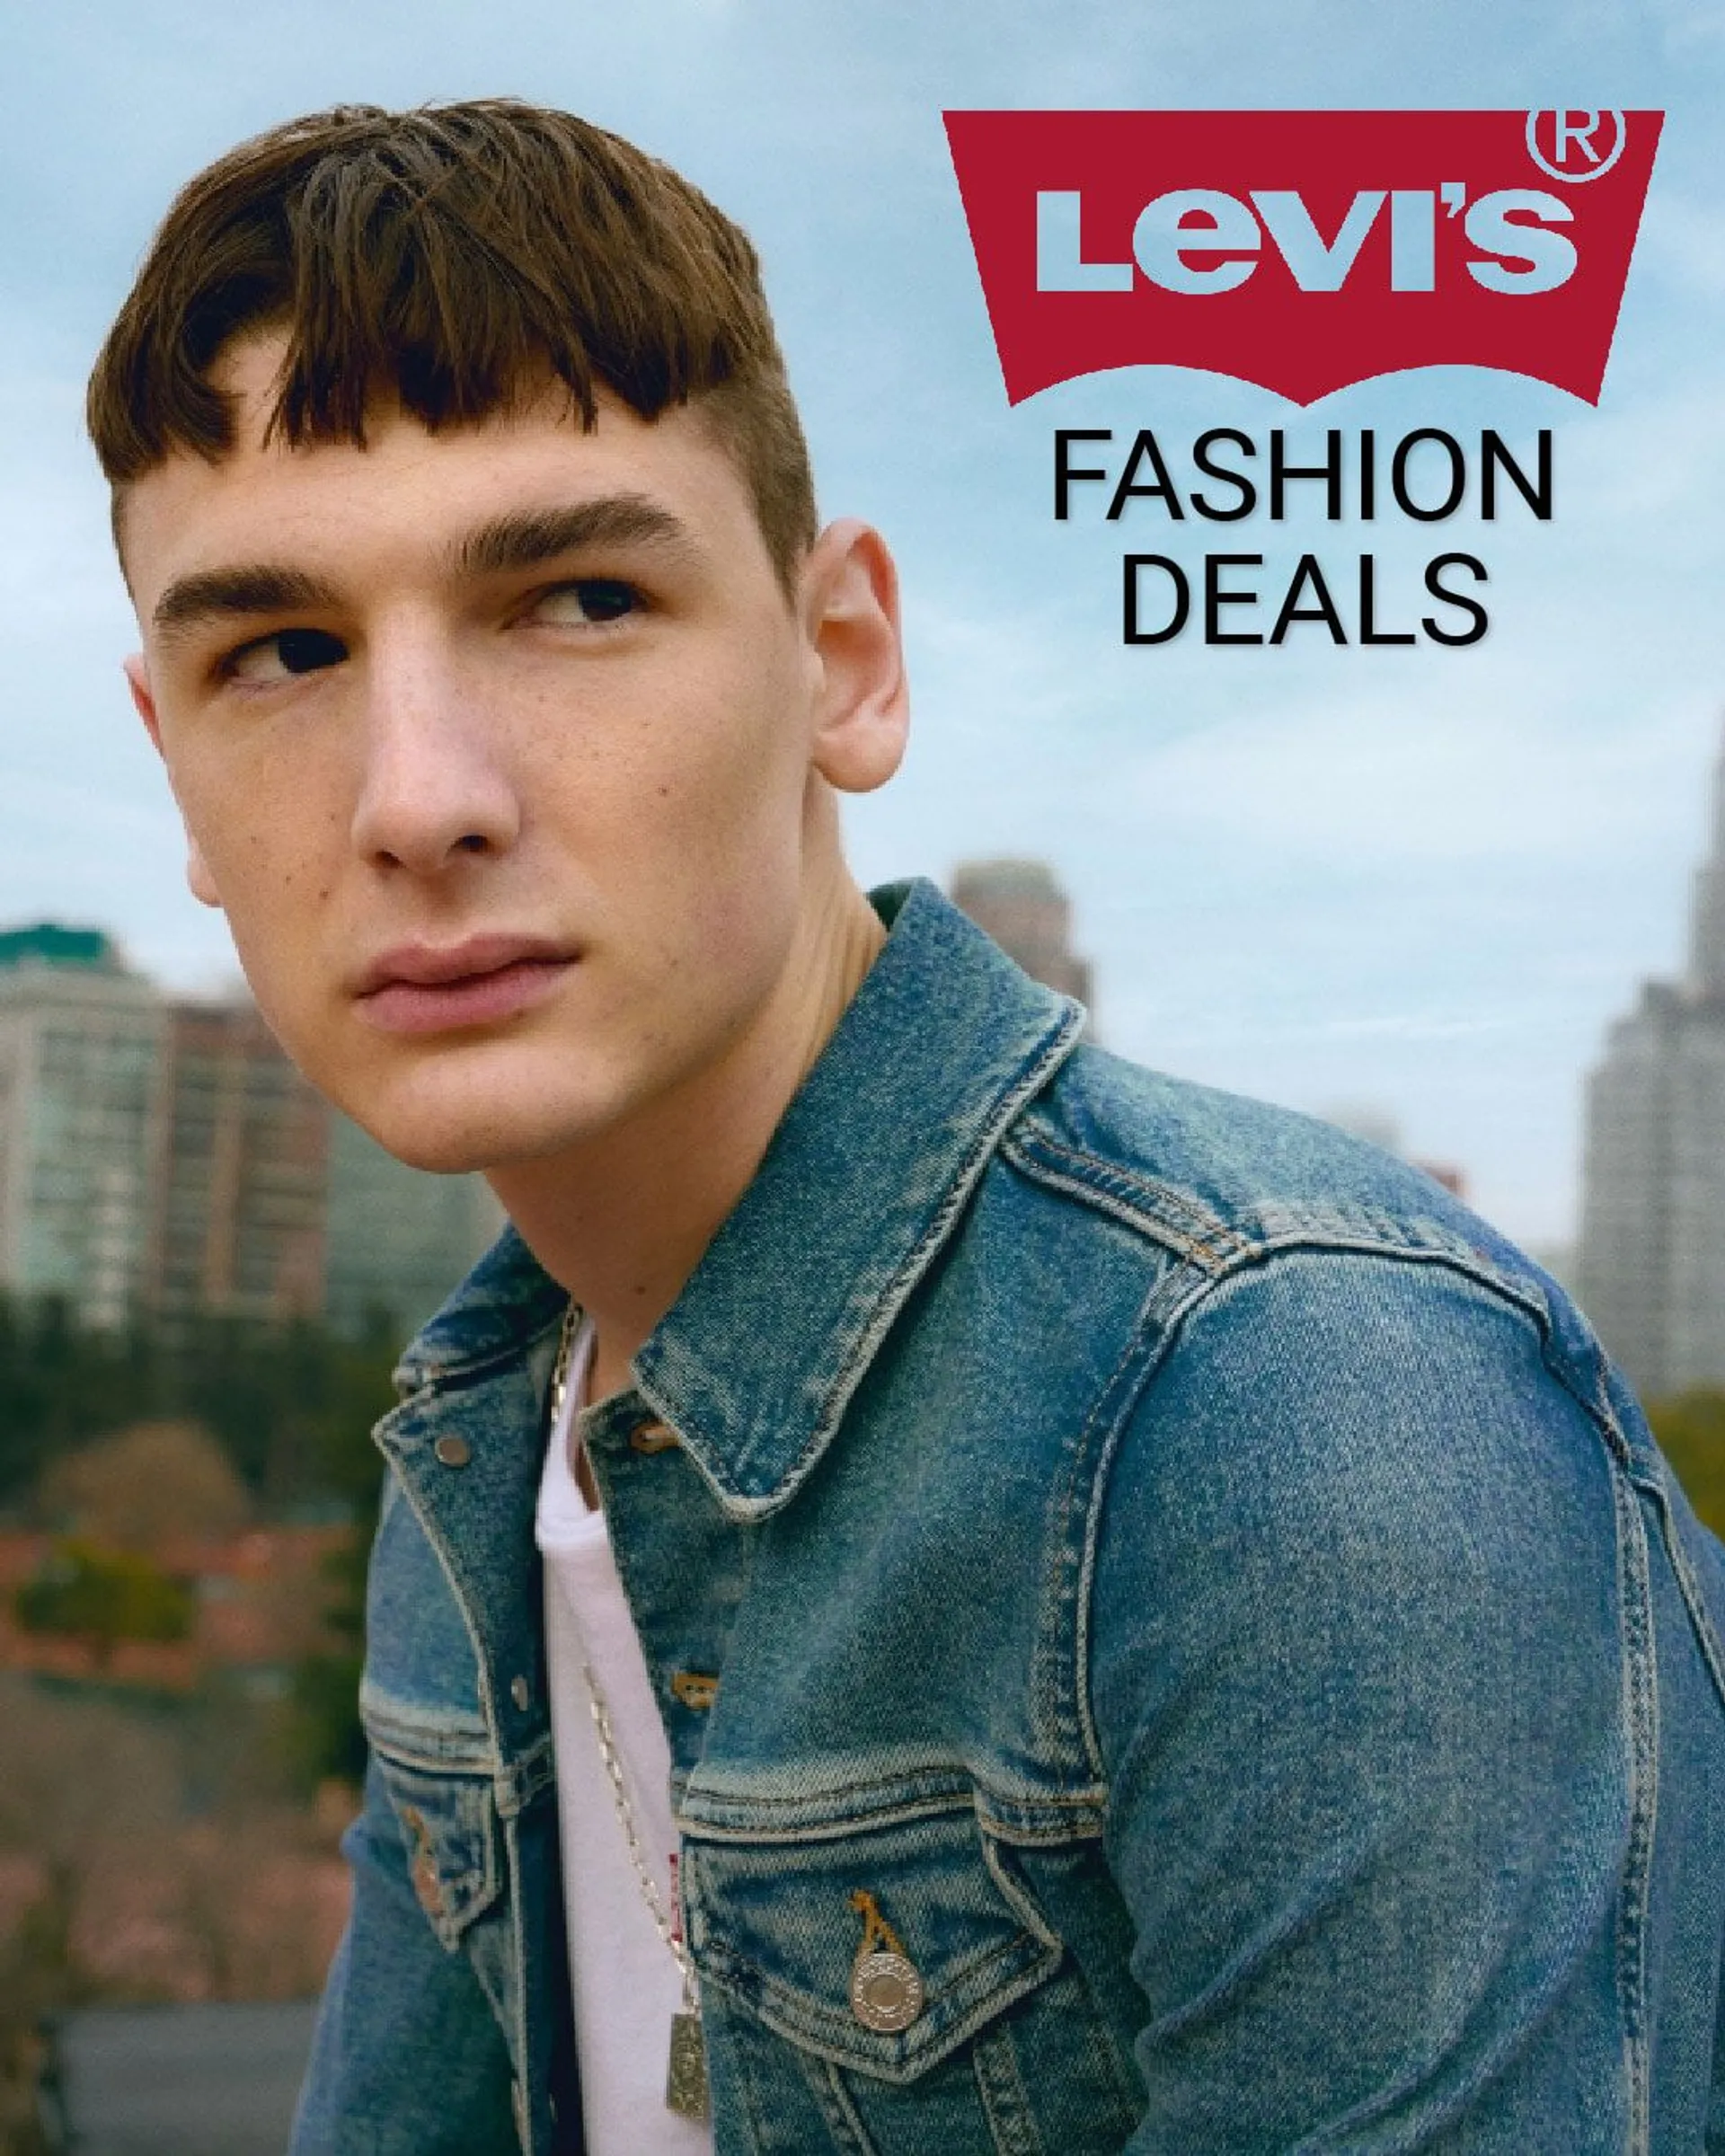 Levi's - Jeans & Clothing